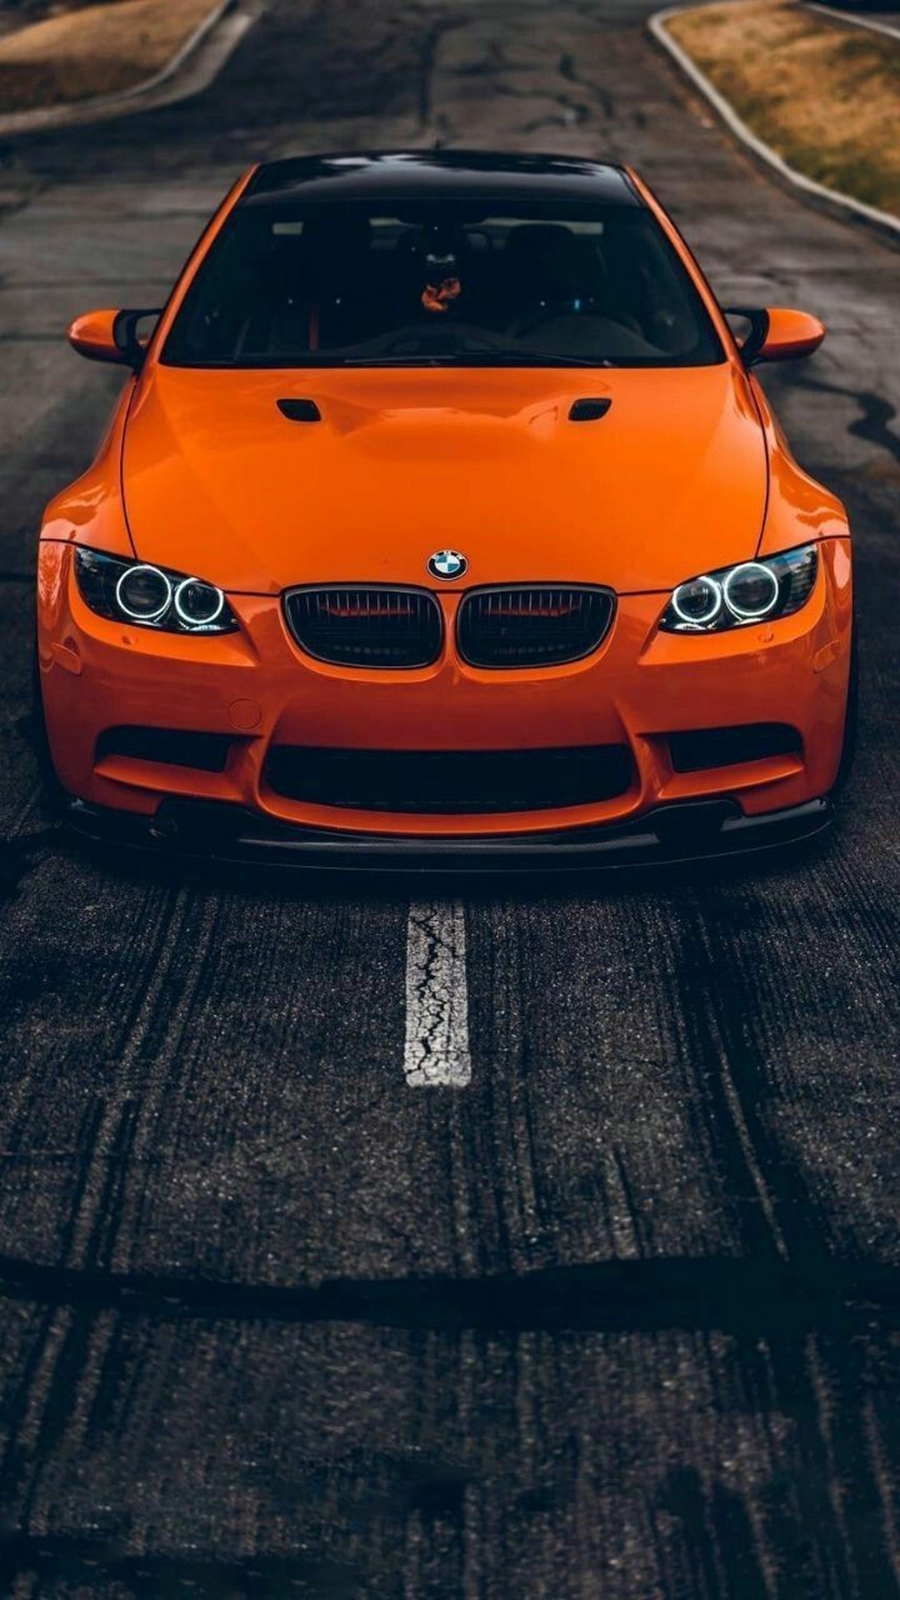 BMW Wallpapers for Mobile - Best Wallpapers (10) - Best ...